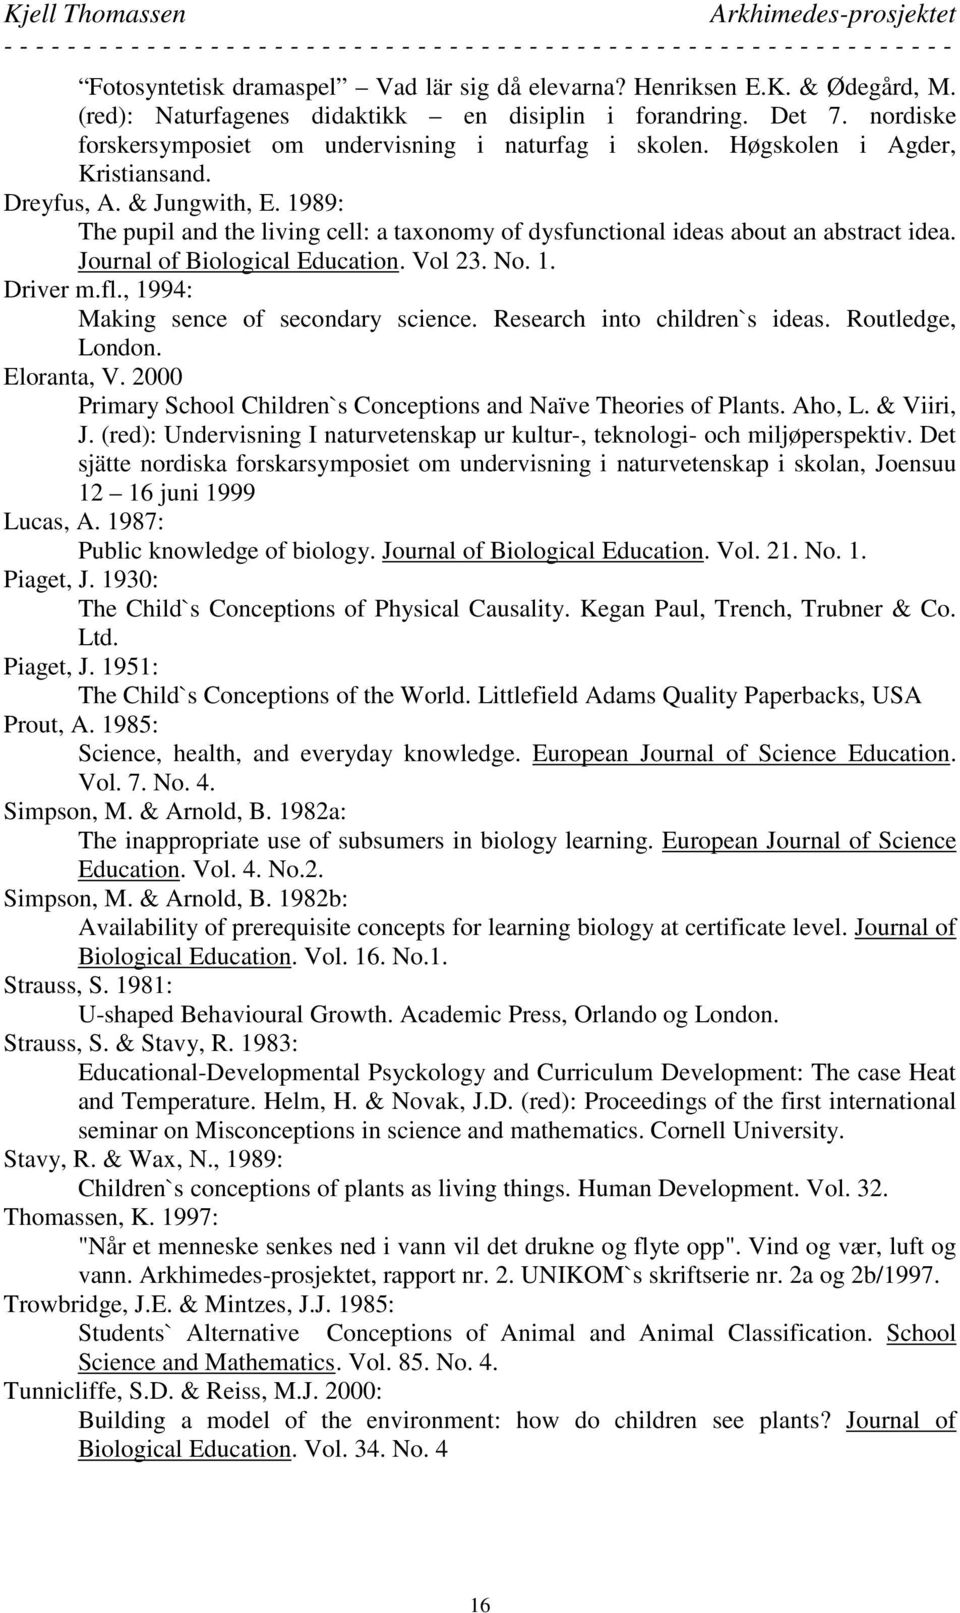 1989: The pupil and the living cell: a taxonomy of dysfunctional ideas about an abstract idea. Journal of Biological Education. Vol 23. No. 1. Driver m.fl., 1994: Making sence of secondary science.